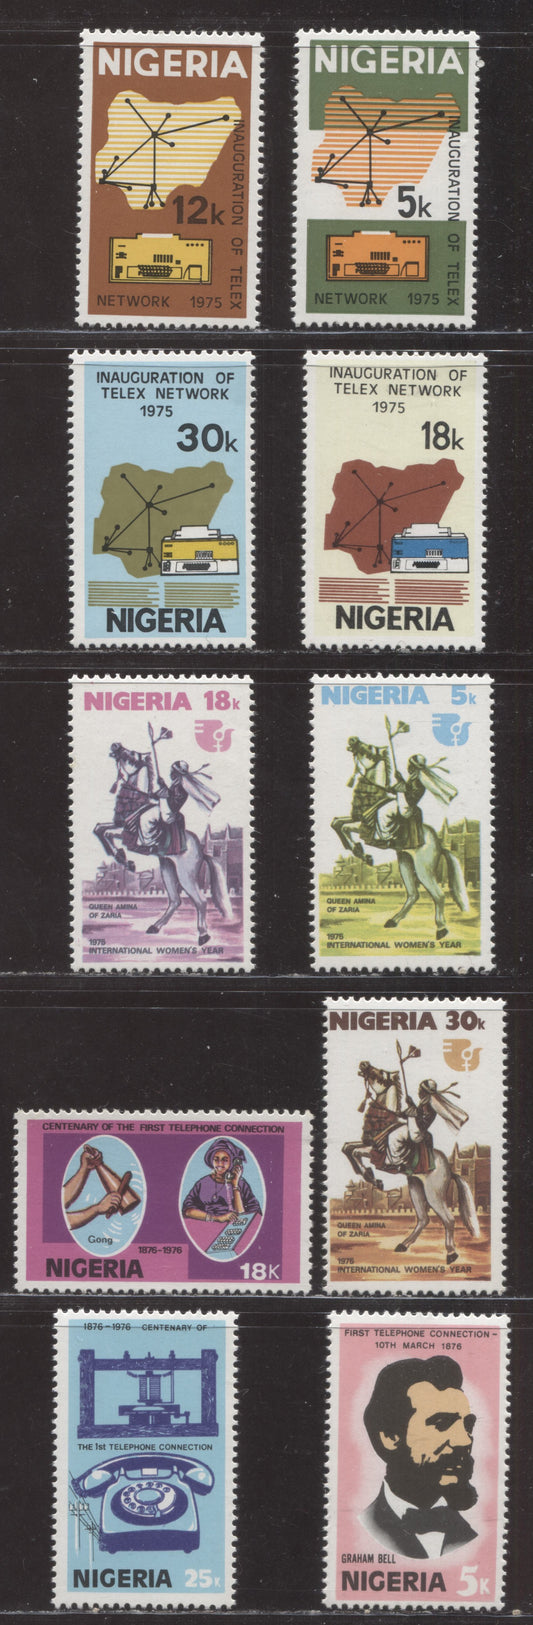 Nigeria SC#327-336 1975-1976 Telex Network - Telephone Centenary, 10 VFNH Singles, Click on Listing to See ALL Pictures, 2017 Scott Cat. $5.7 USD